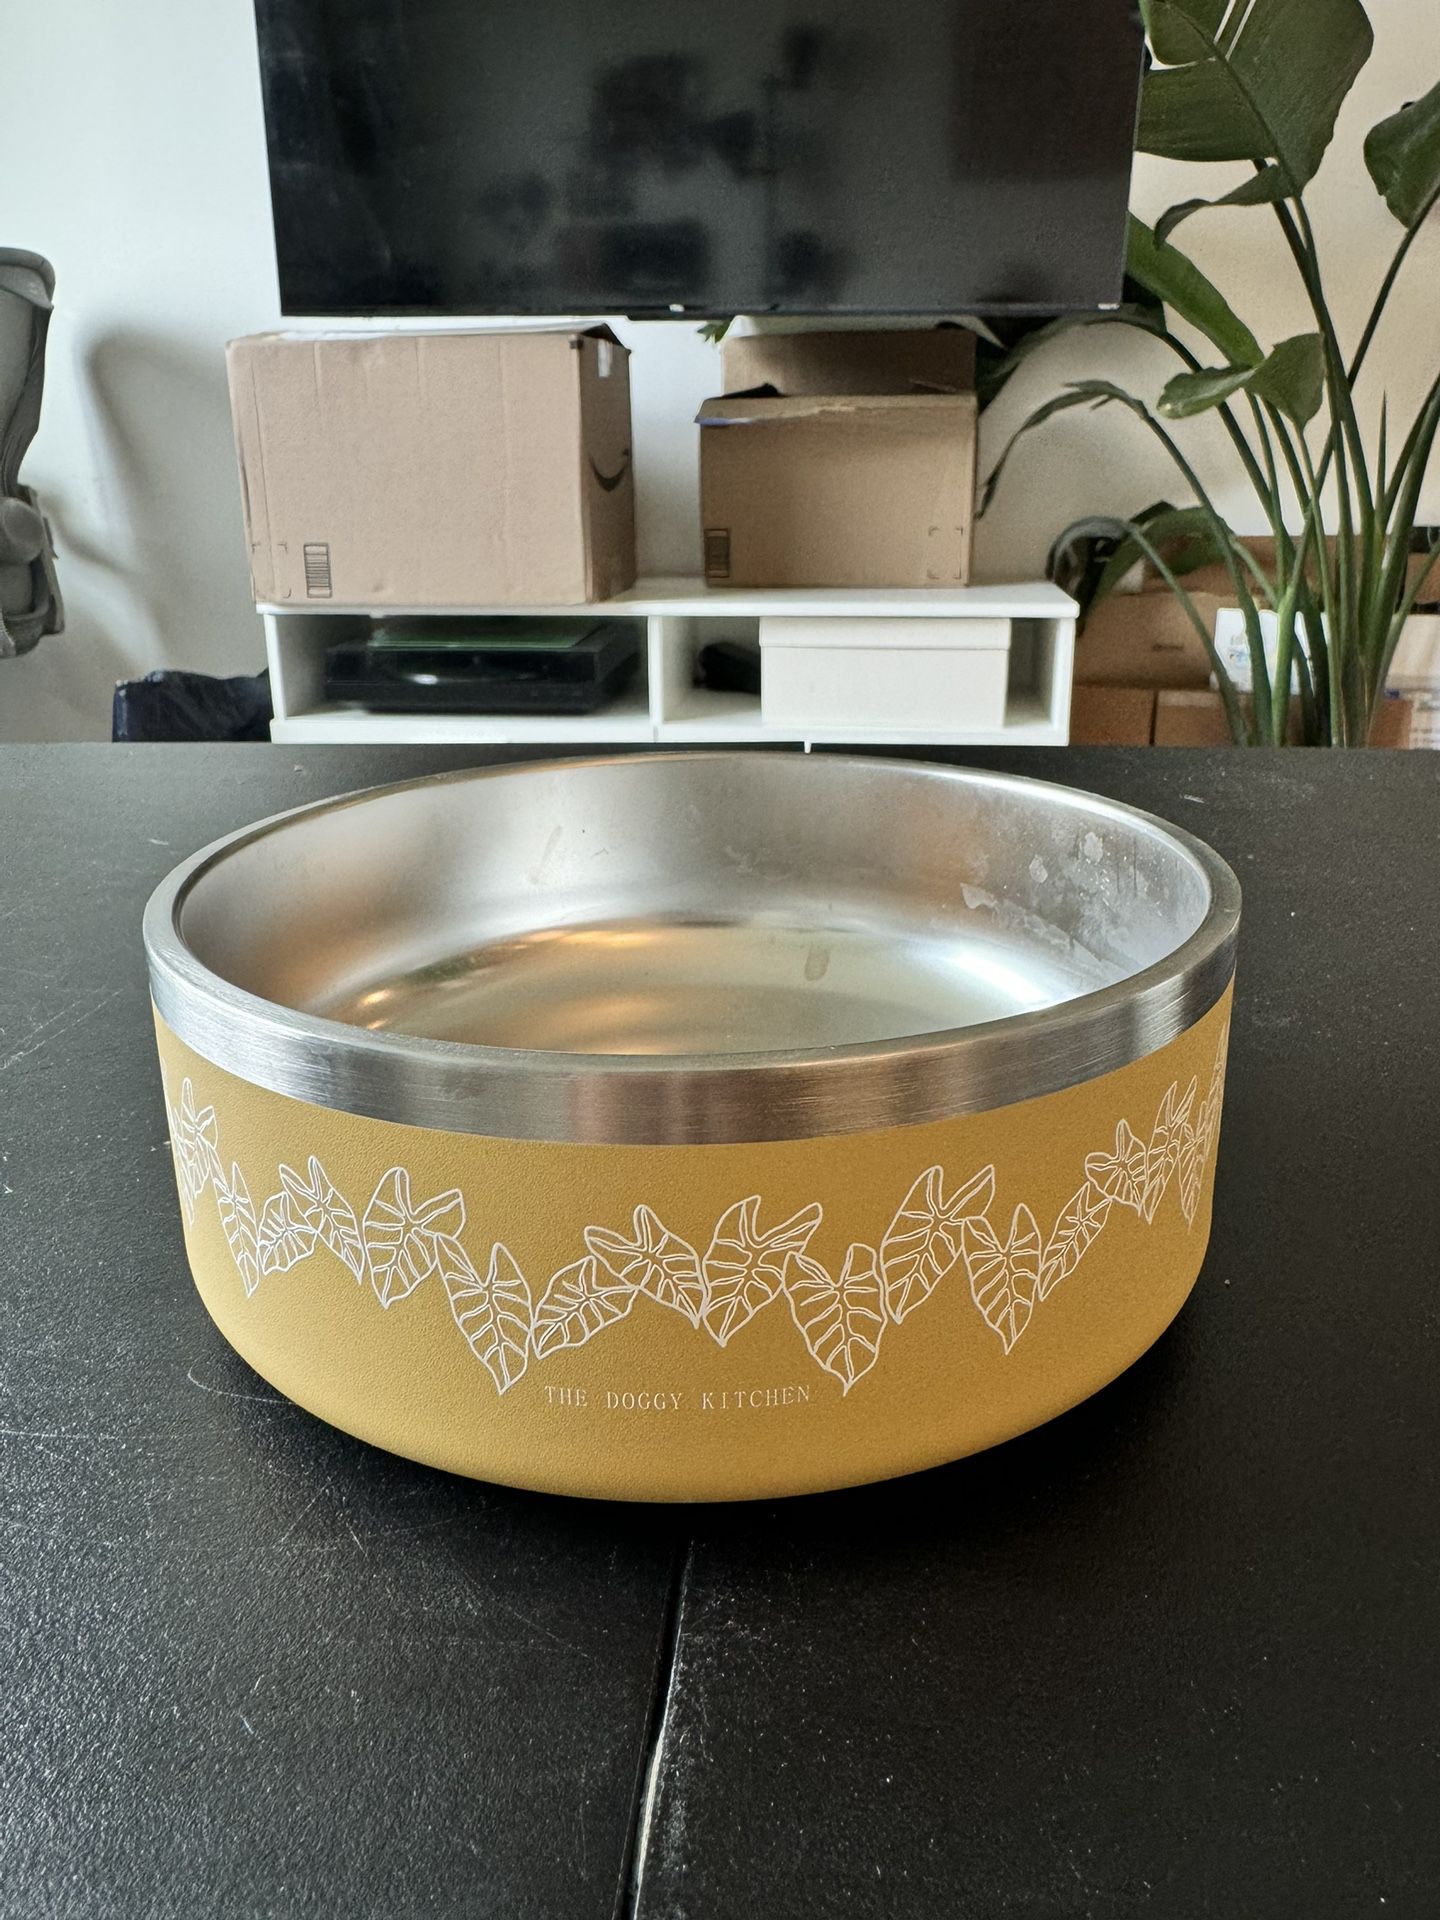 High quality insulated dog bowl